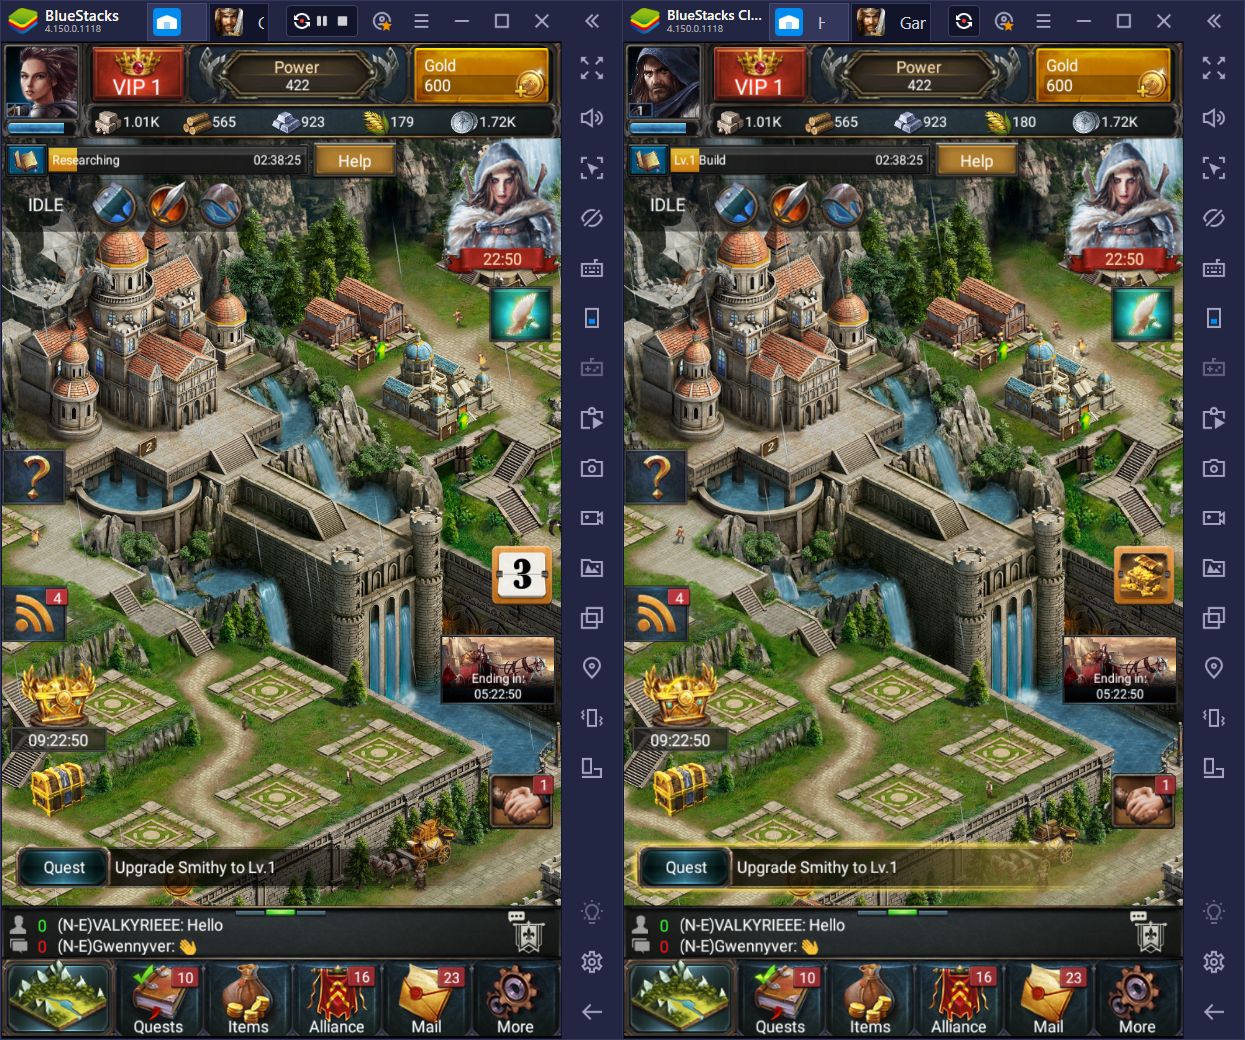 Game of Kings: The Blood Throne on PC - How to Win with BlueStacks